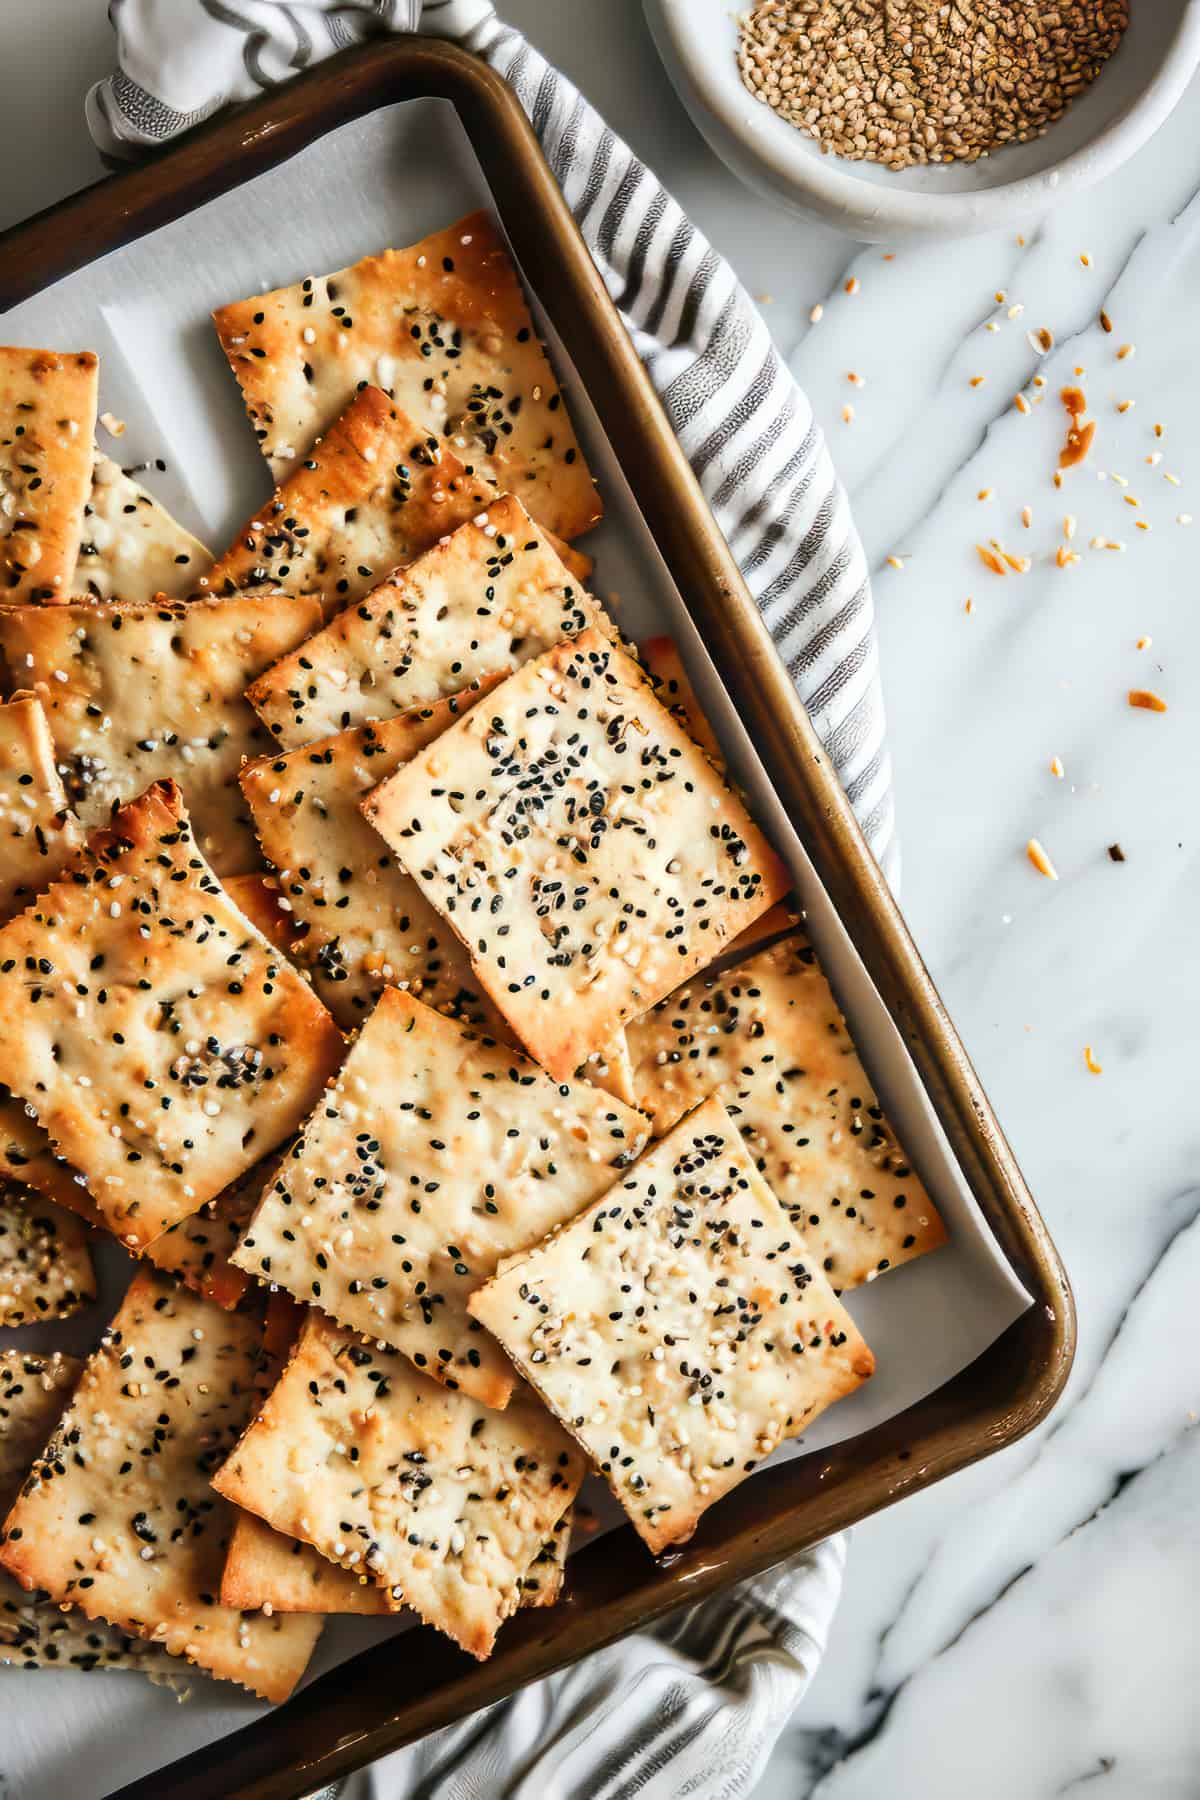 Homemade flatbread crackers with seeds on a baking tray.